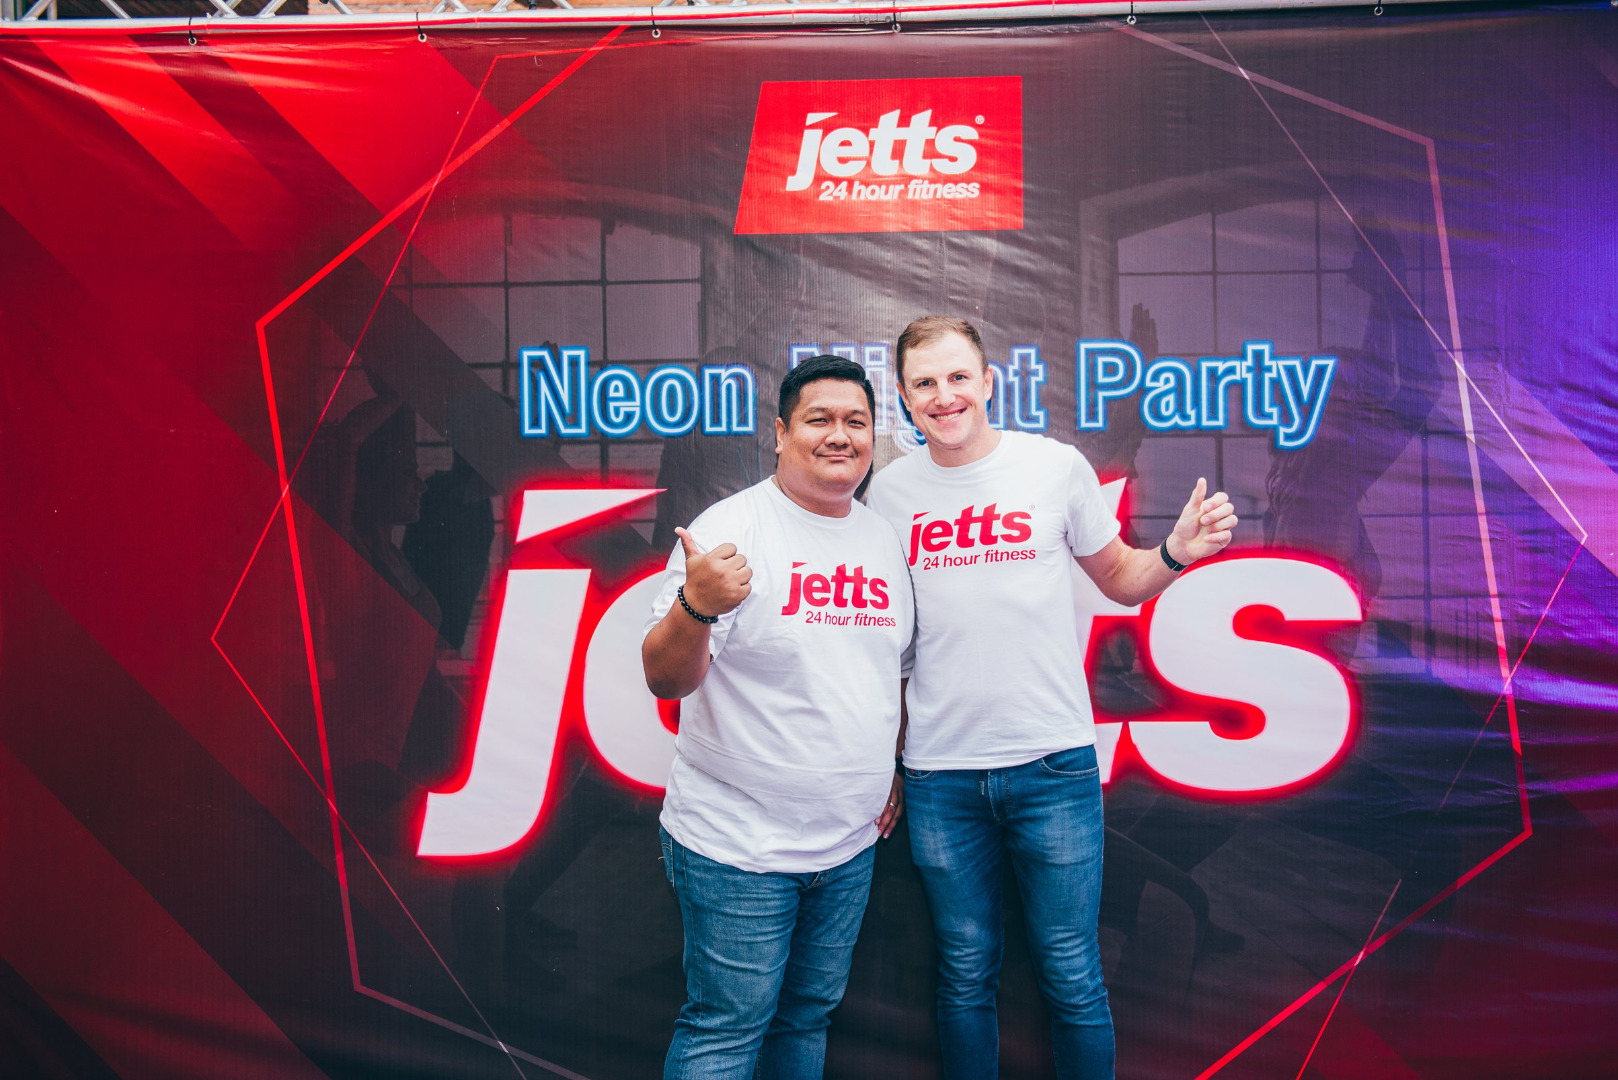 Jetts Neon Party at One Nimman